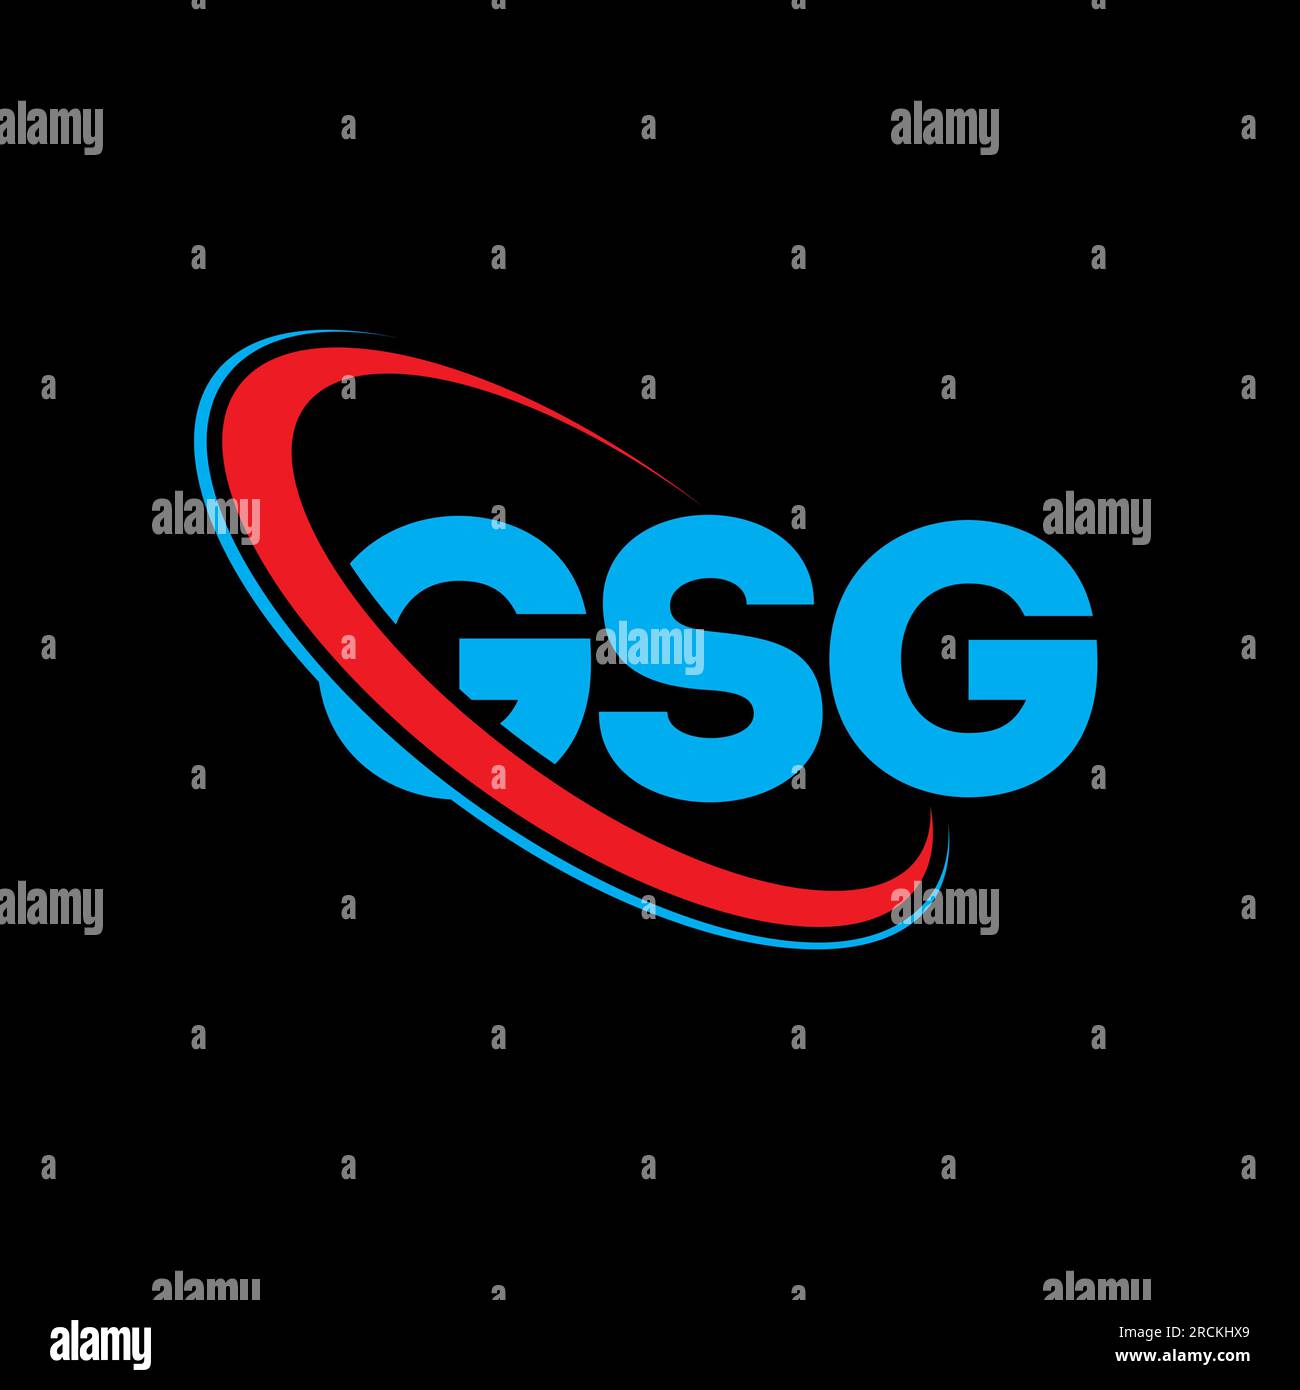 GSG logo. GSG letter. GSG letter logo design. Initials GSG logo linked with circle and uppercase monogram logo. GSG typography for technology, busines Stock Vector